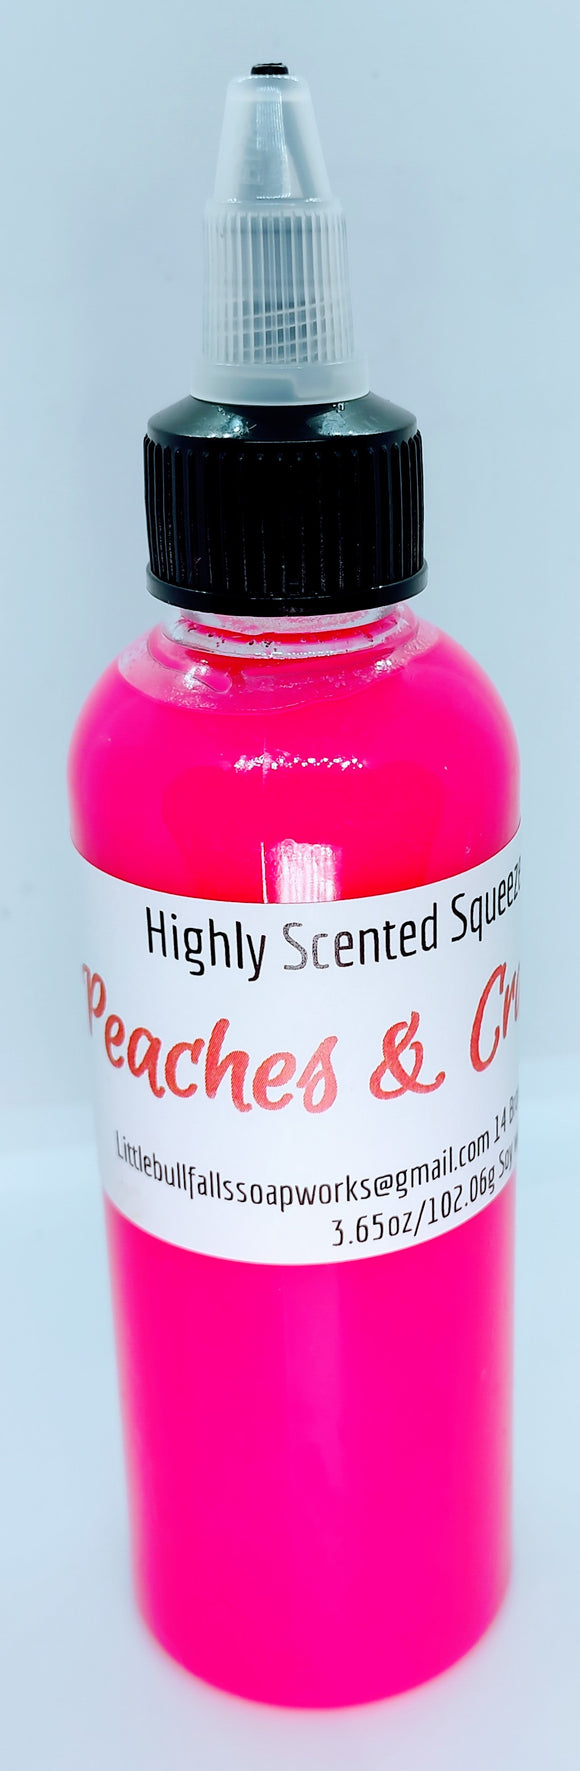 Peaches & Cranberries Squeeze Wax